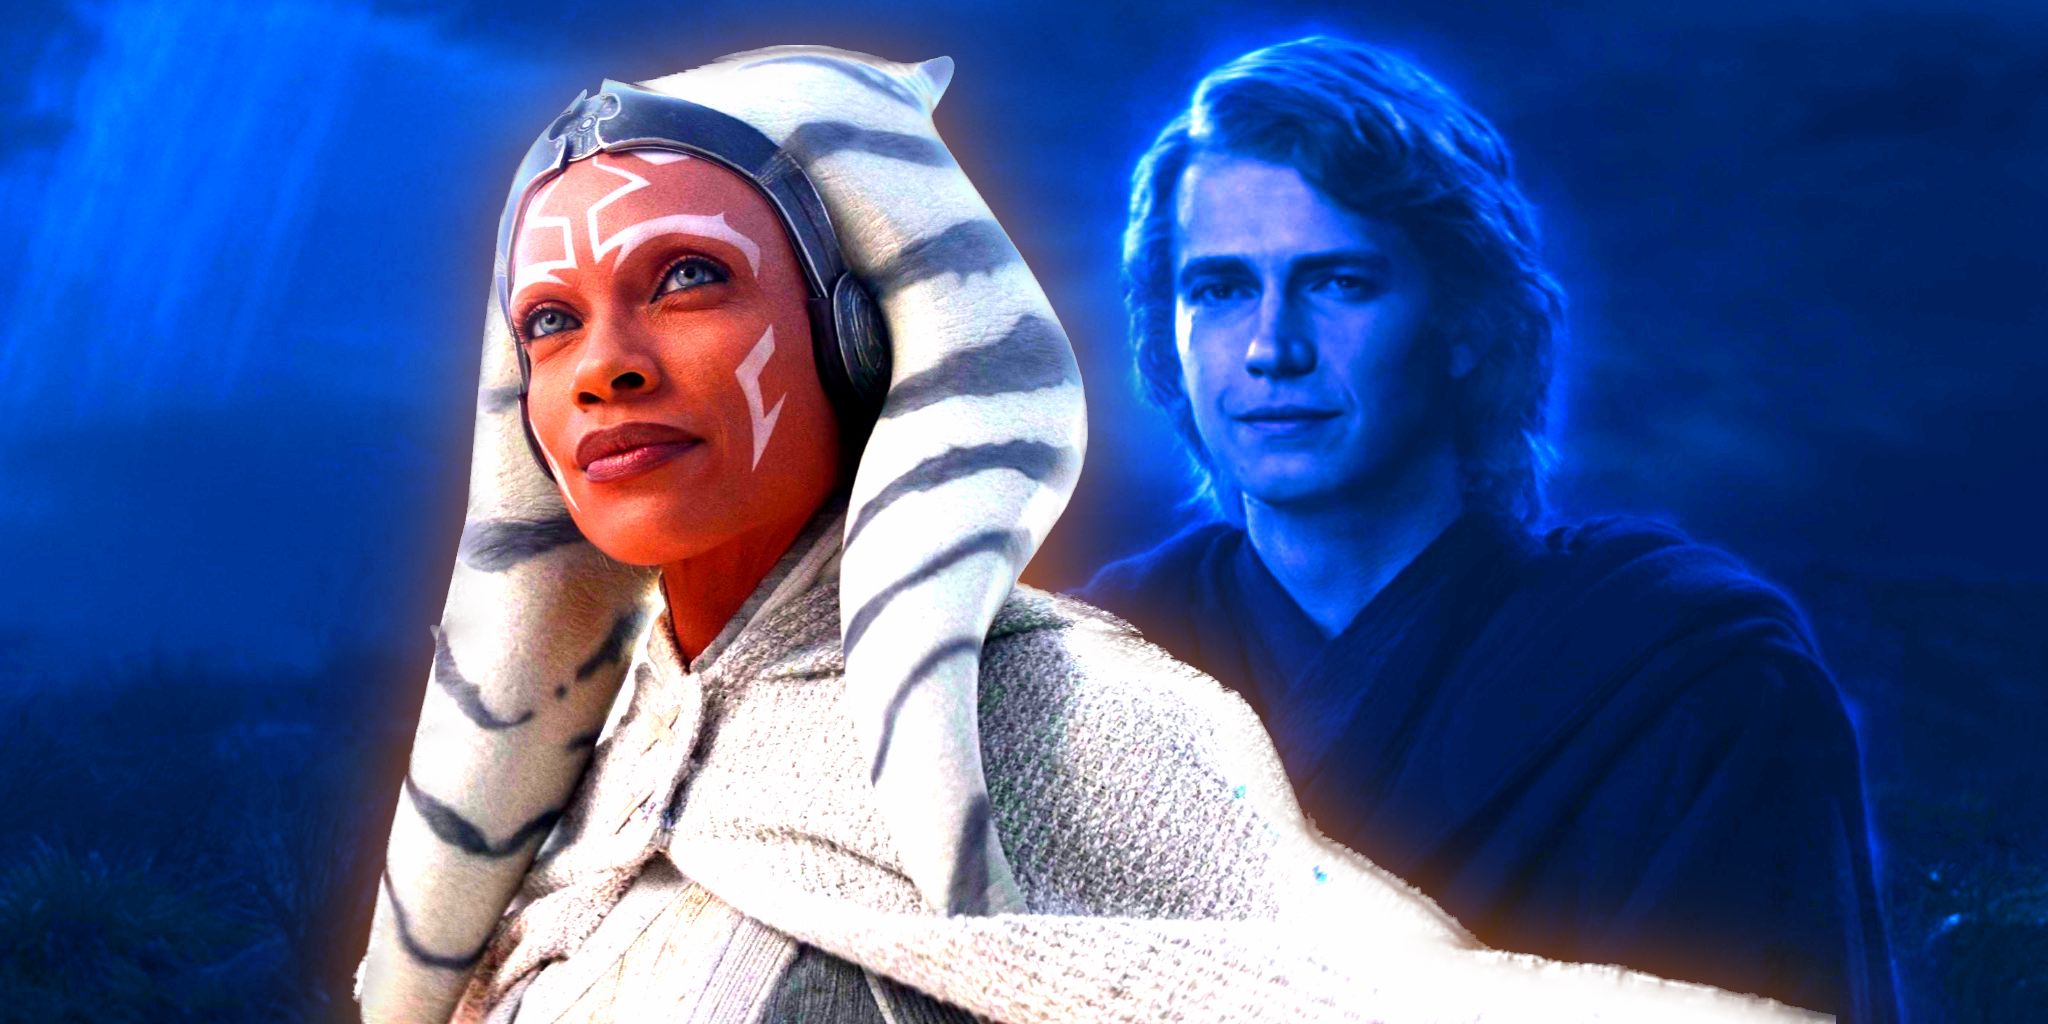 “I Never Showed Her Deal With Anakin”: Ahsoka The White Transformation Explained By George Lucas’ Protege